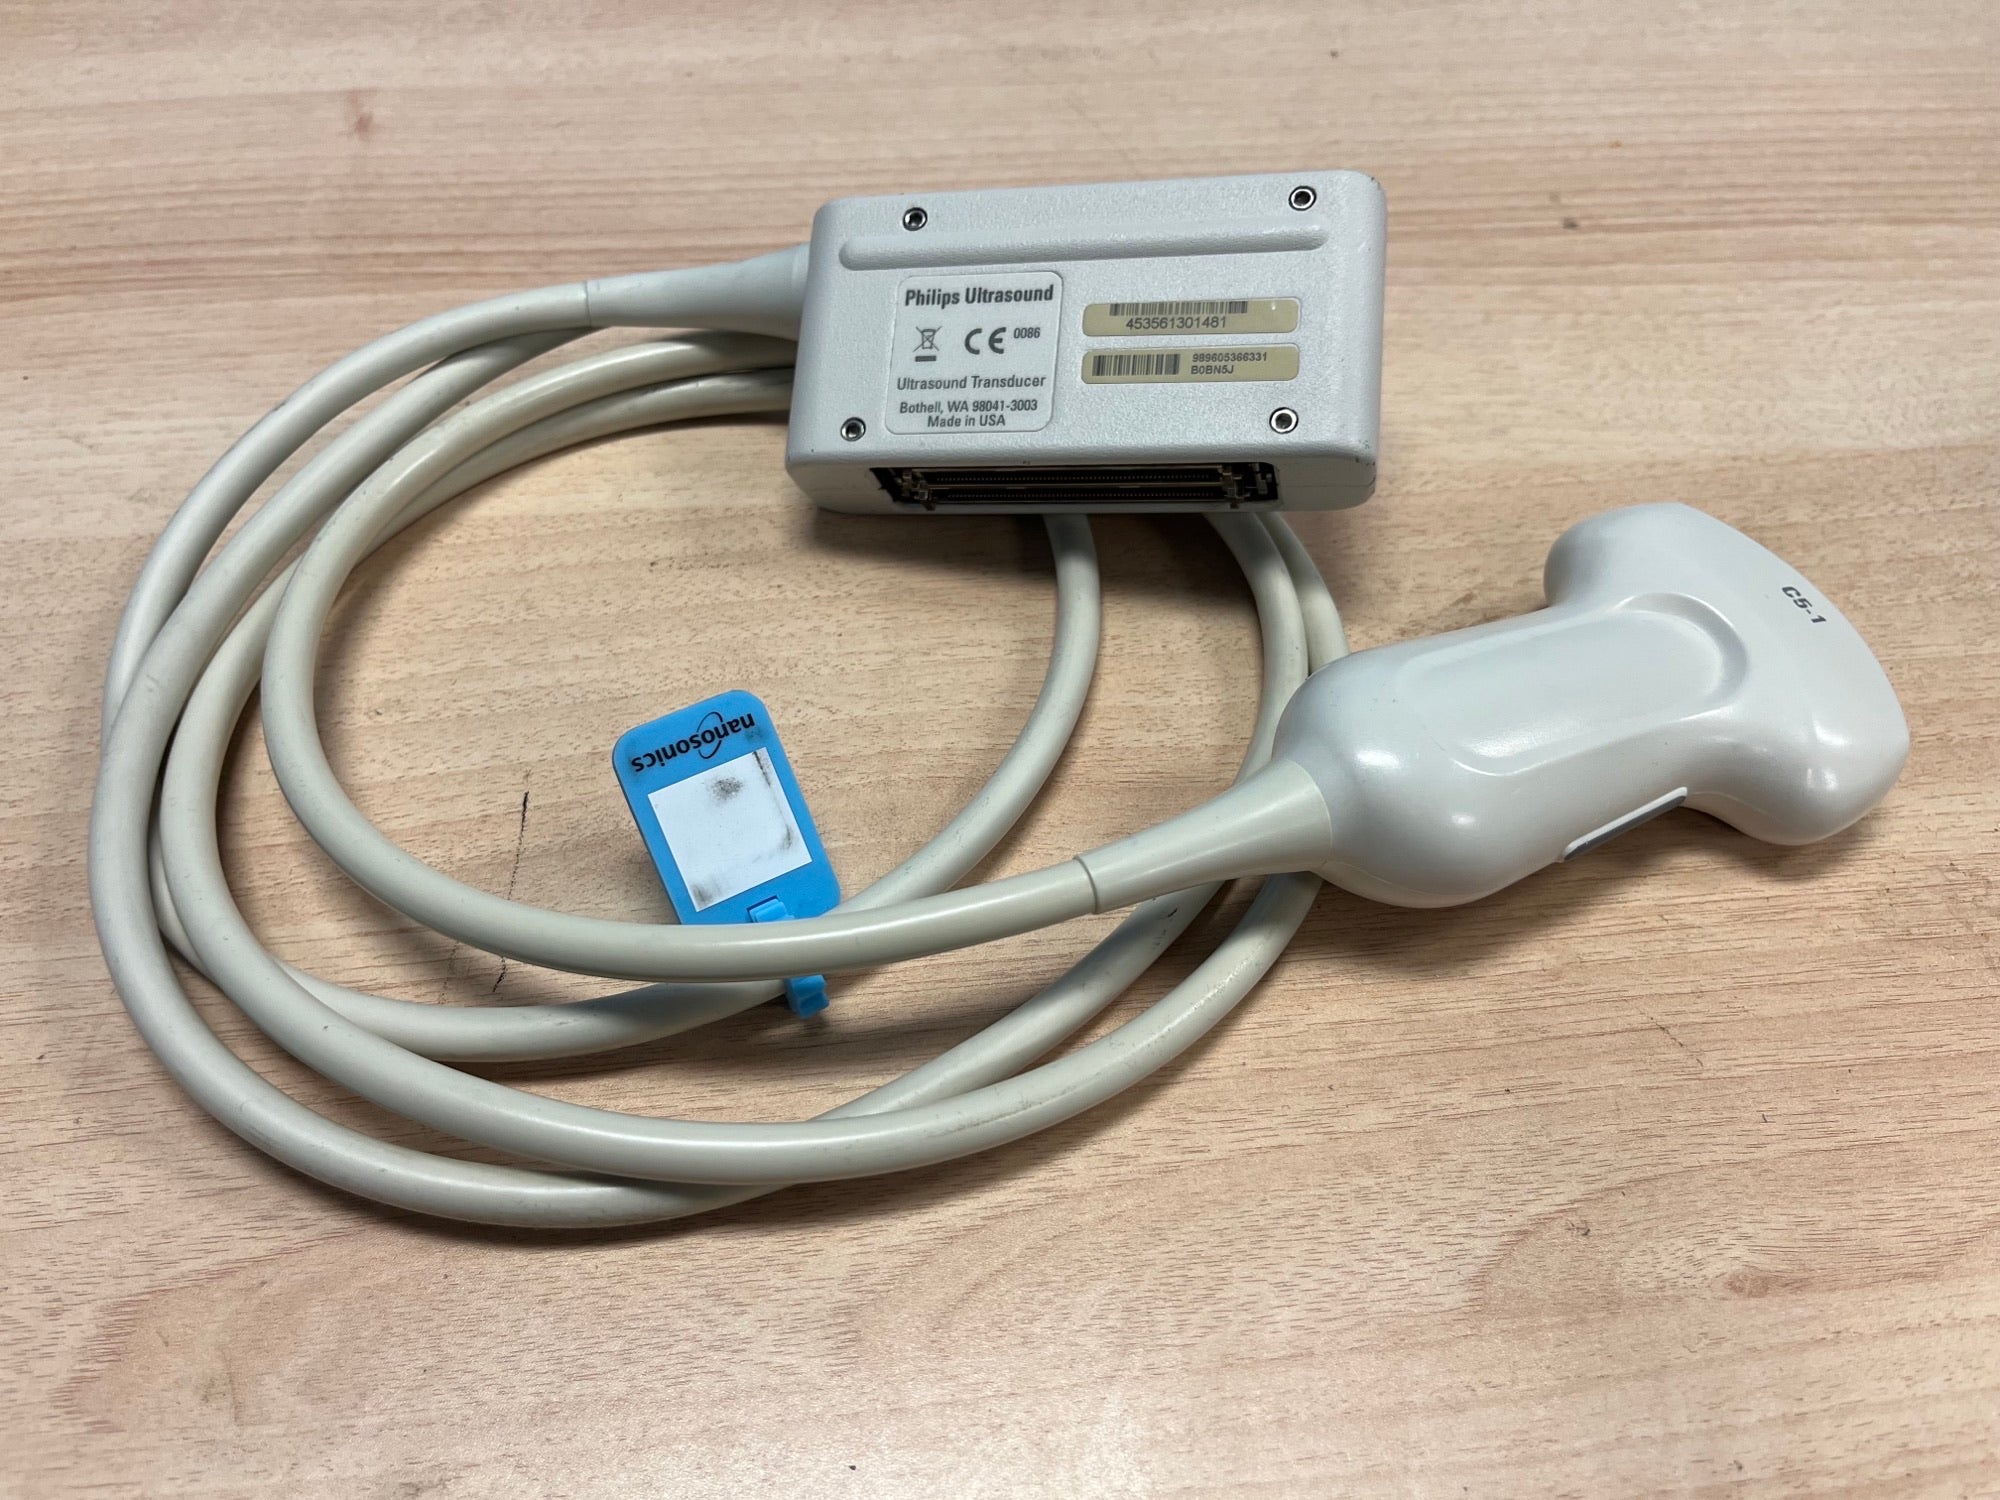 Philips C5-1 Ultrasound Probe for CX50 DIAGNOSTIC ULTRASOUND MACHINES FOR SALE